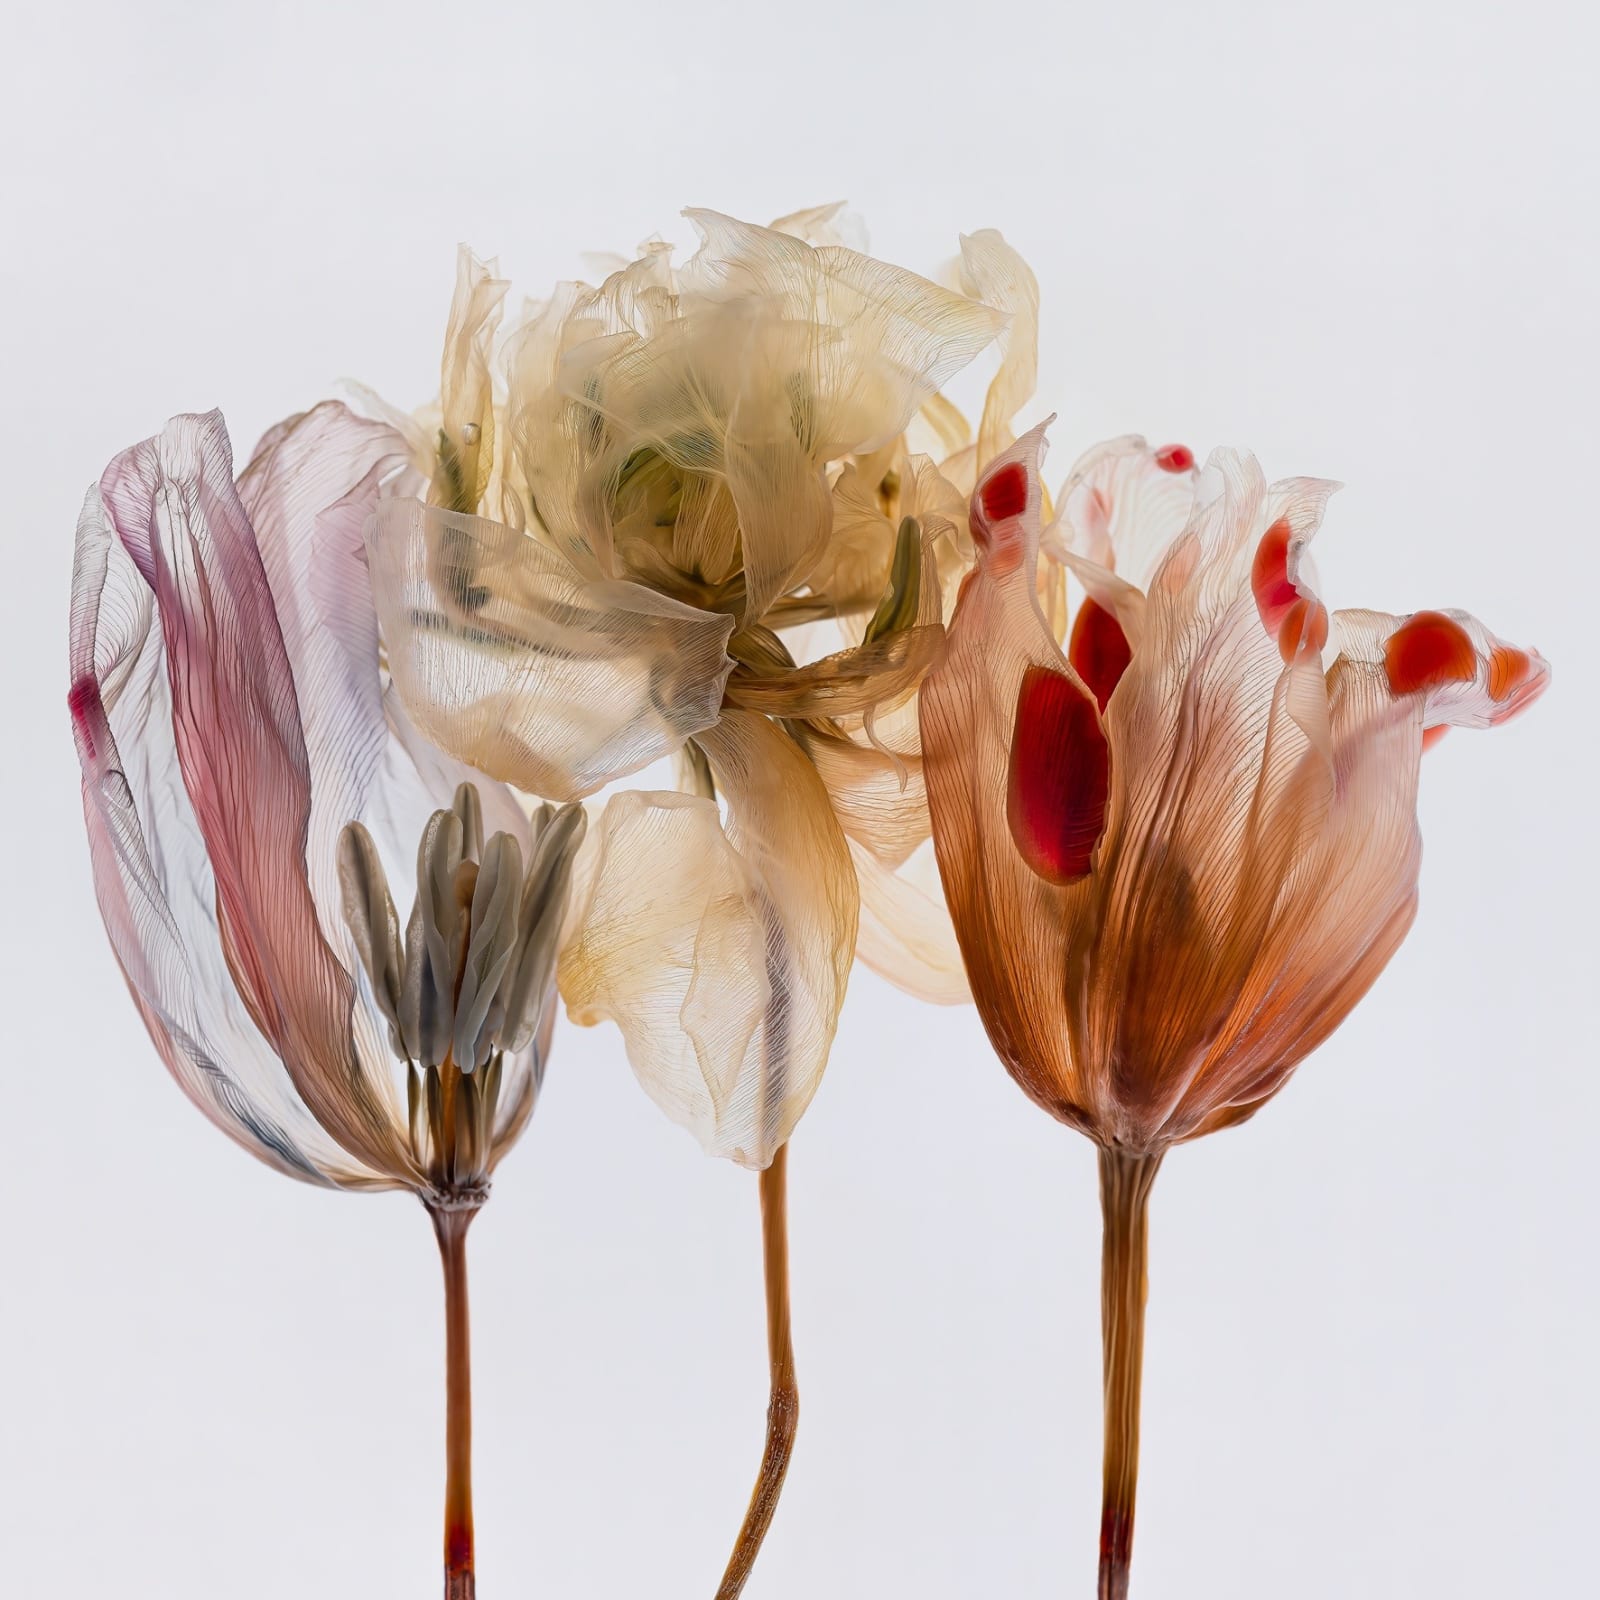 The strange and supernatural flowers by Kathrin Linkersdorff (Purdy Hicks Gallery, London)